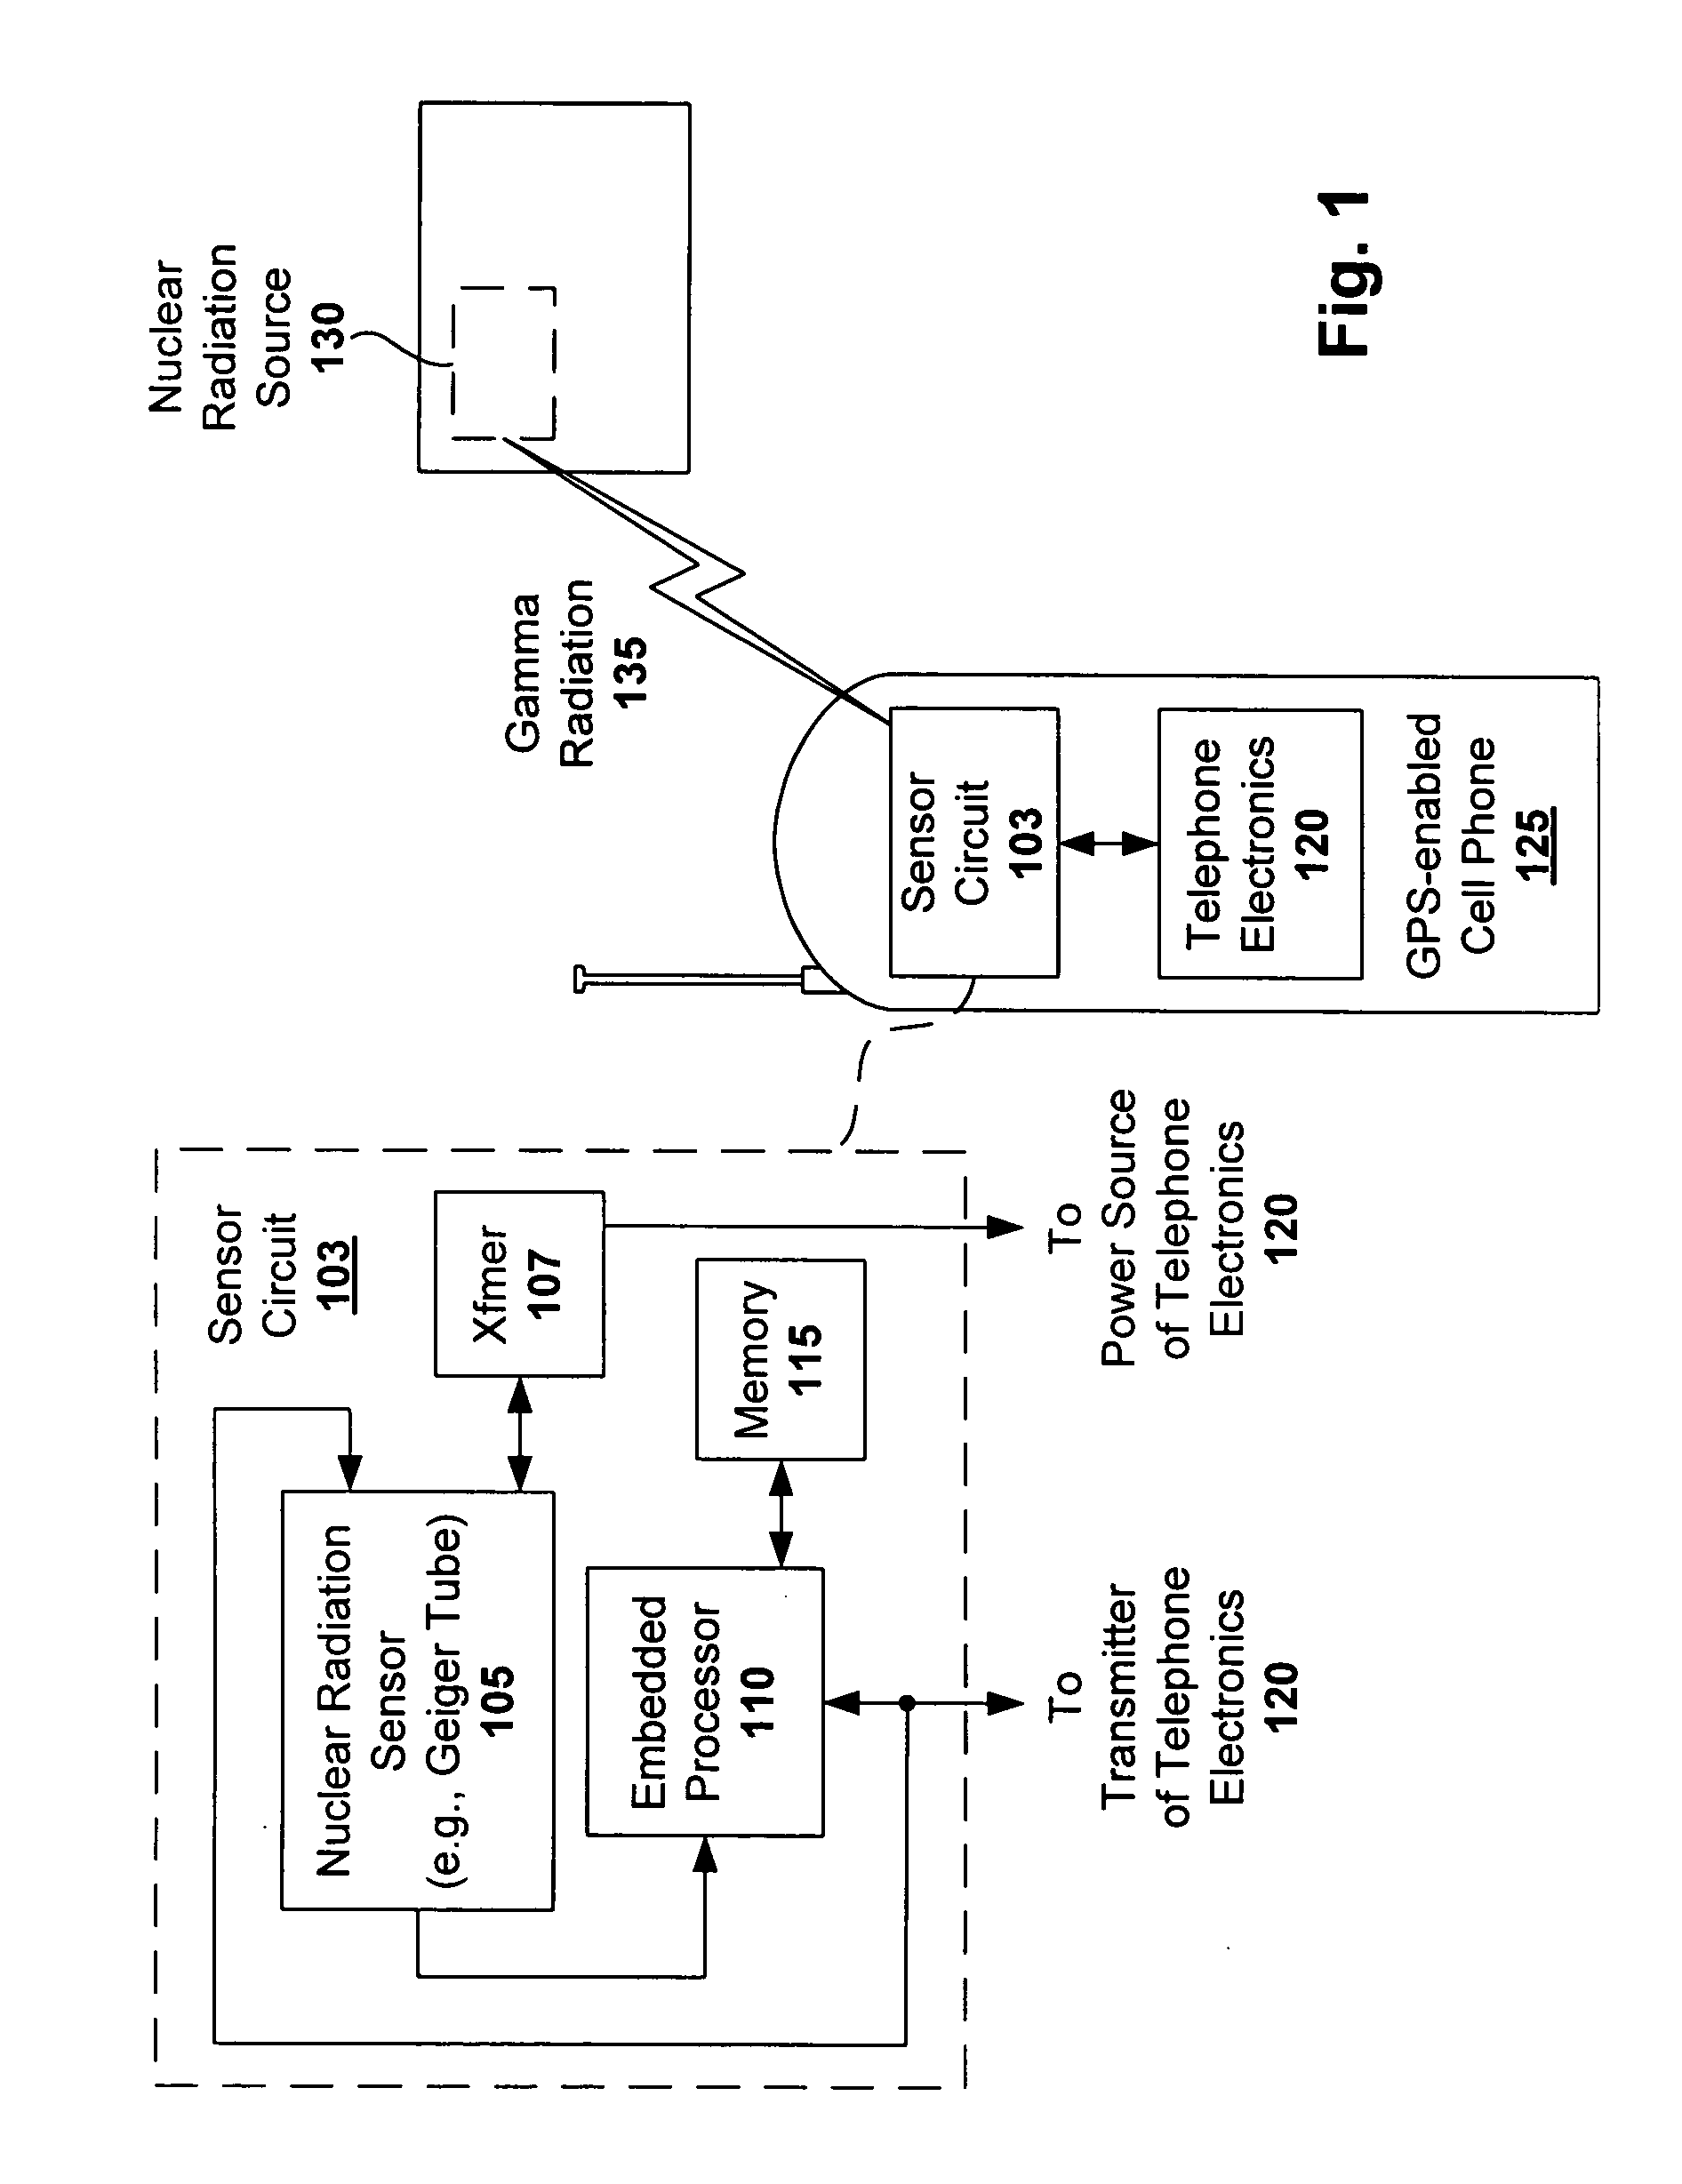 Radiation detection and tracking with GPS-enabled wireless communication system